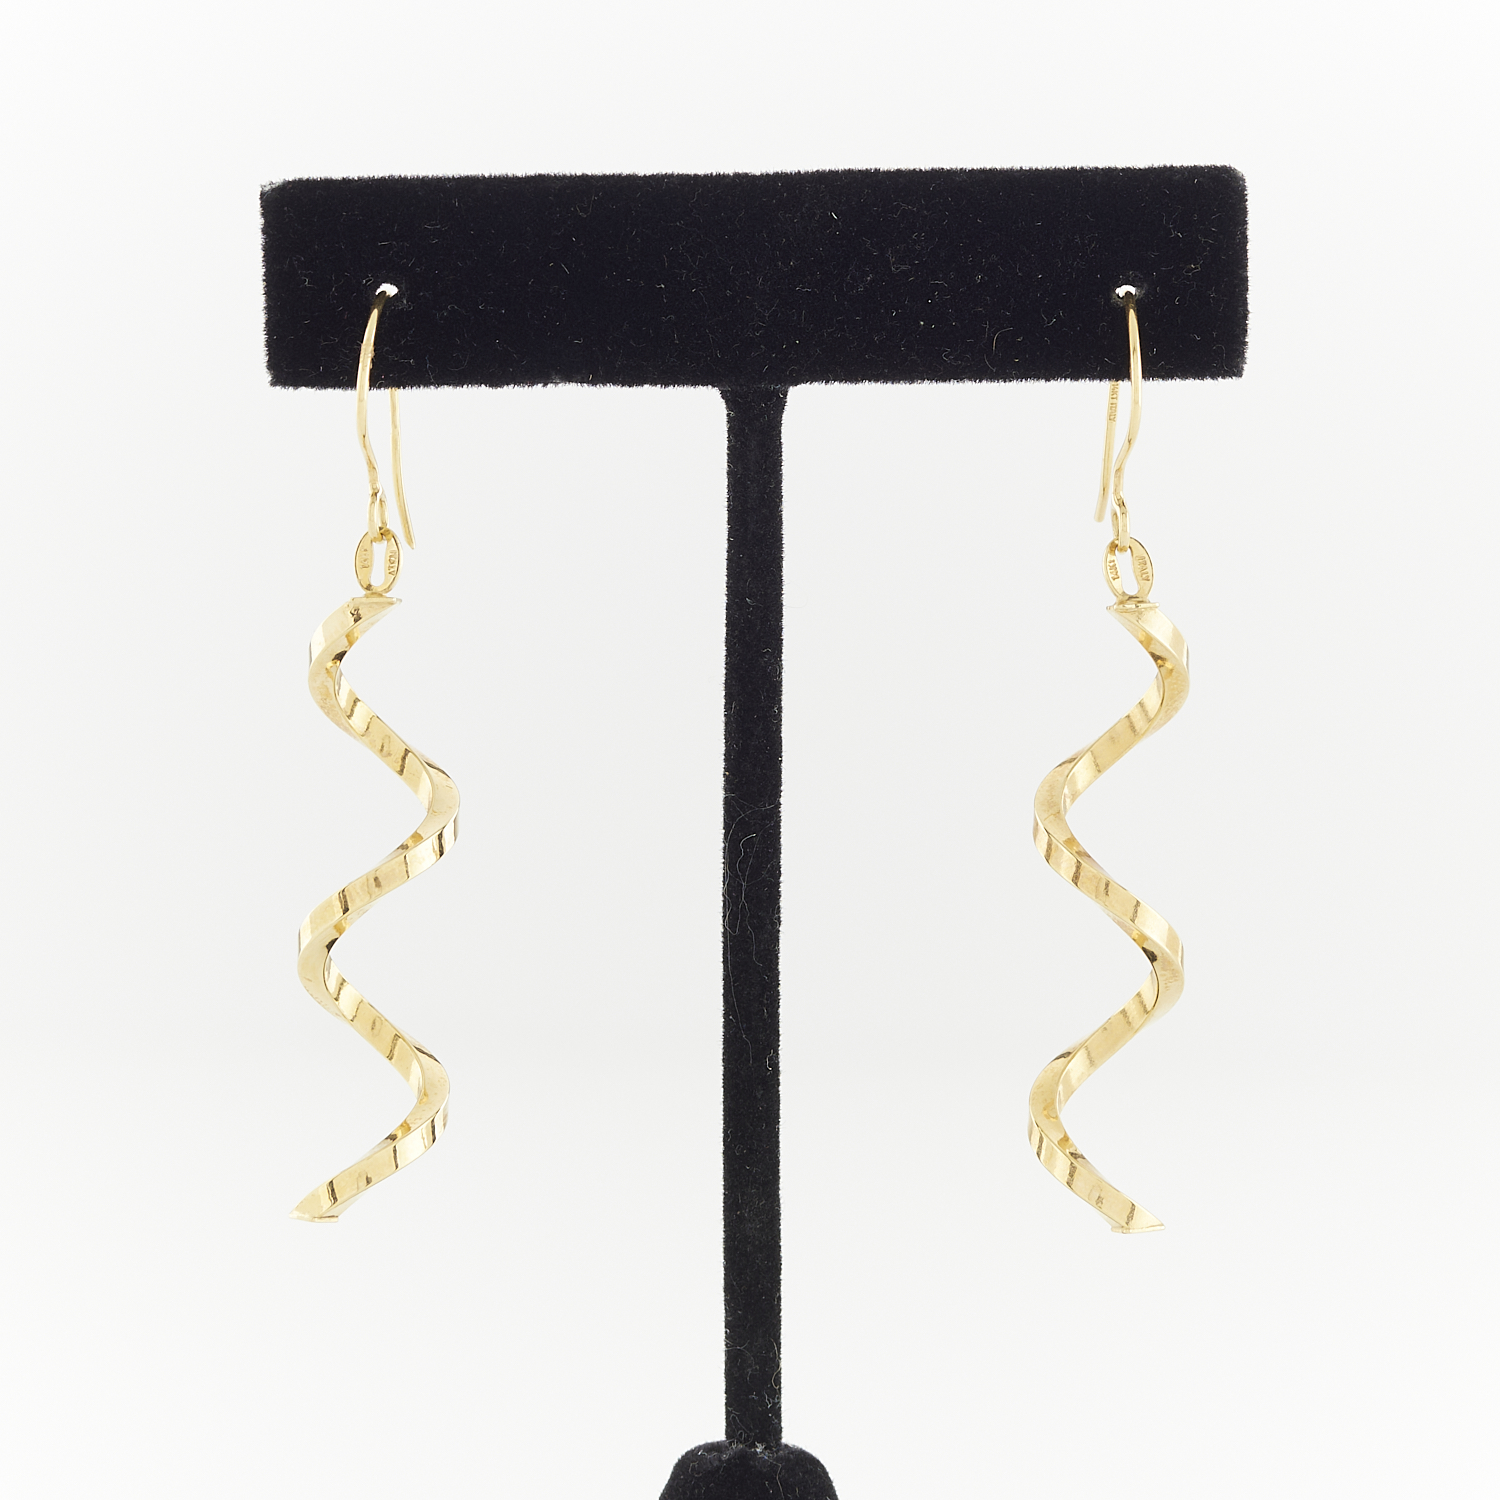 Italian 14k Yellow Gold Spiral Statement Earrings - Image 3 of 8